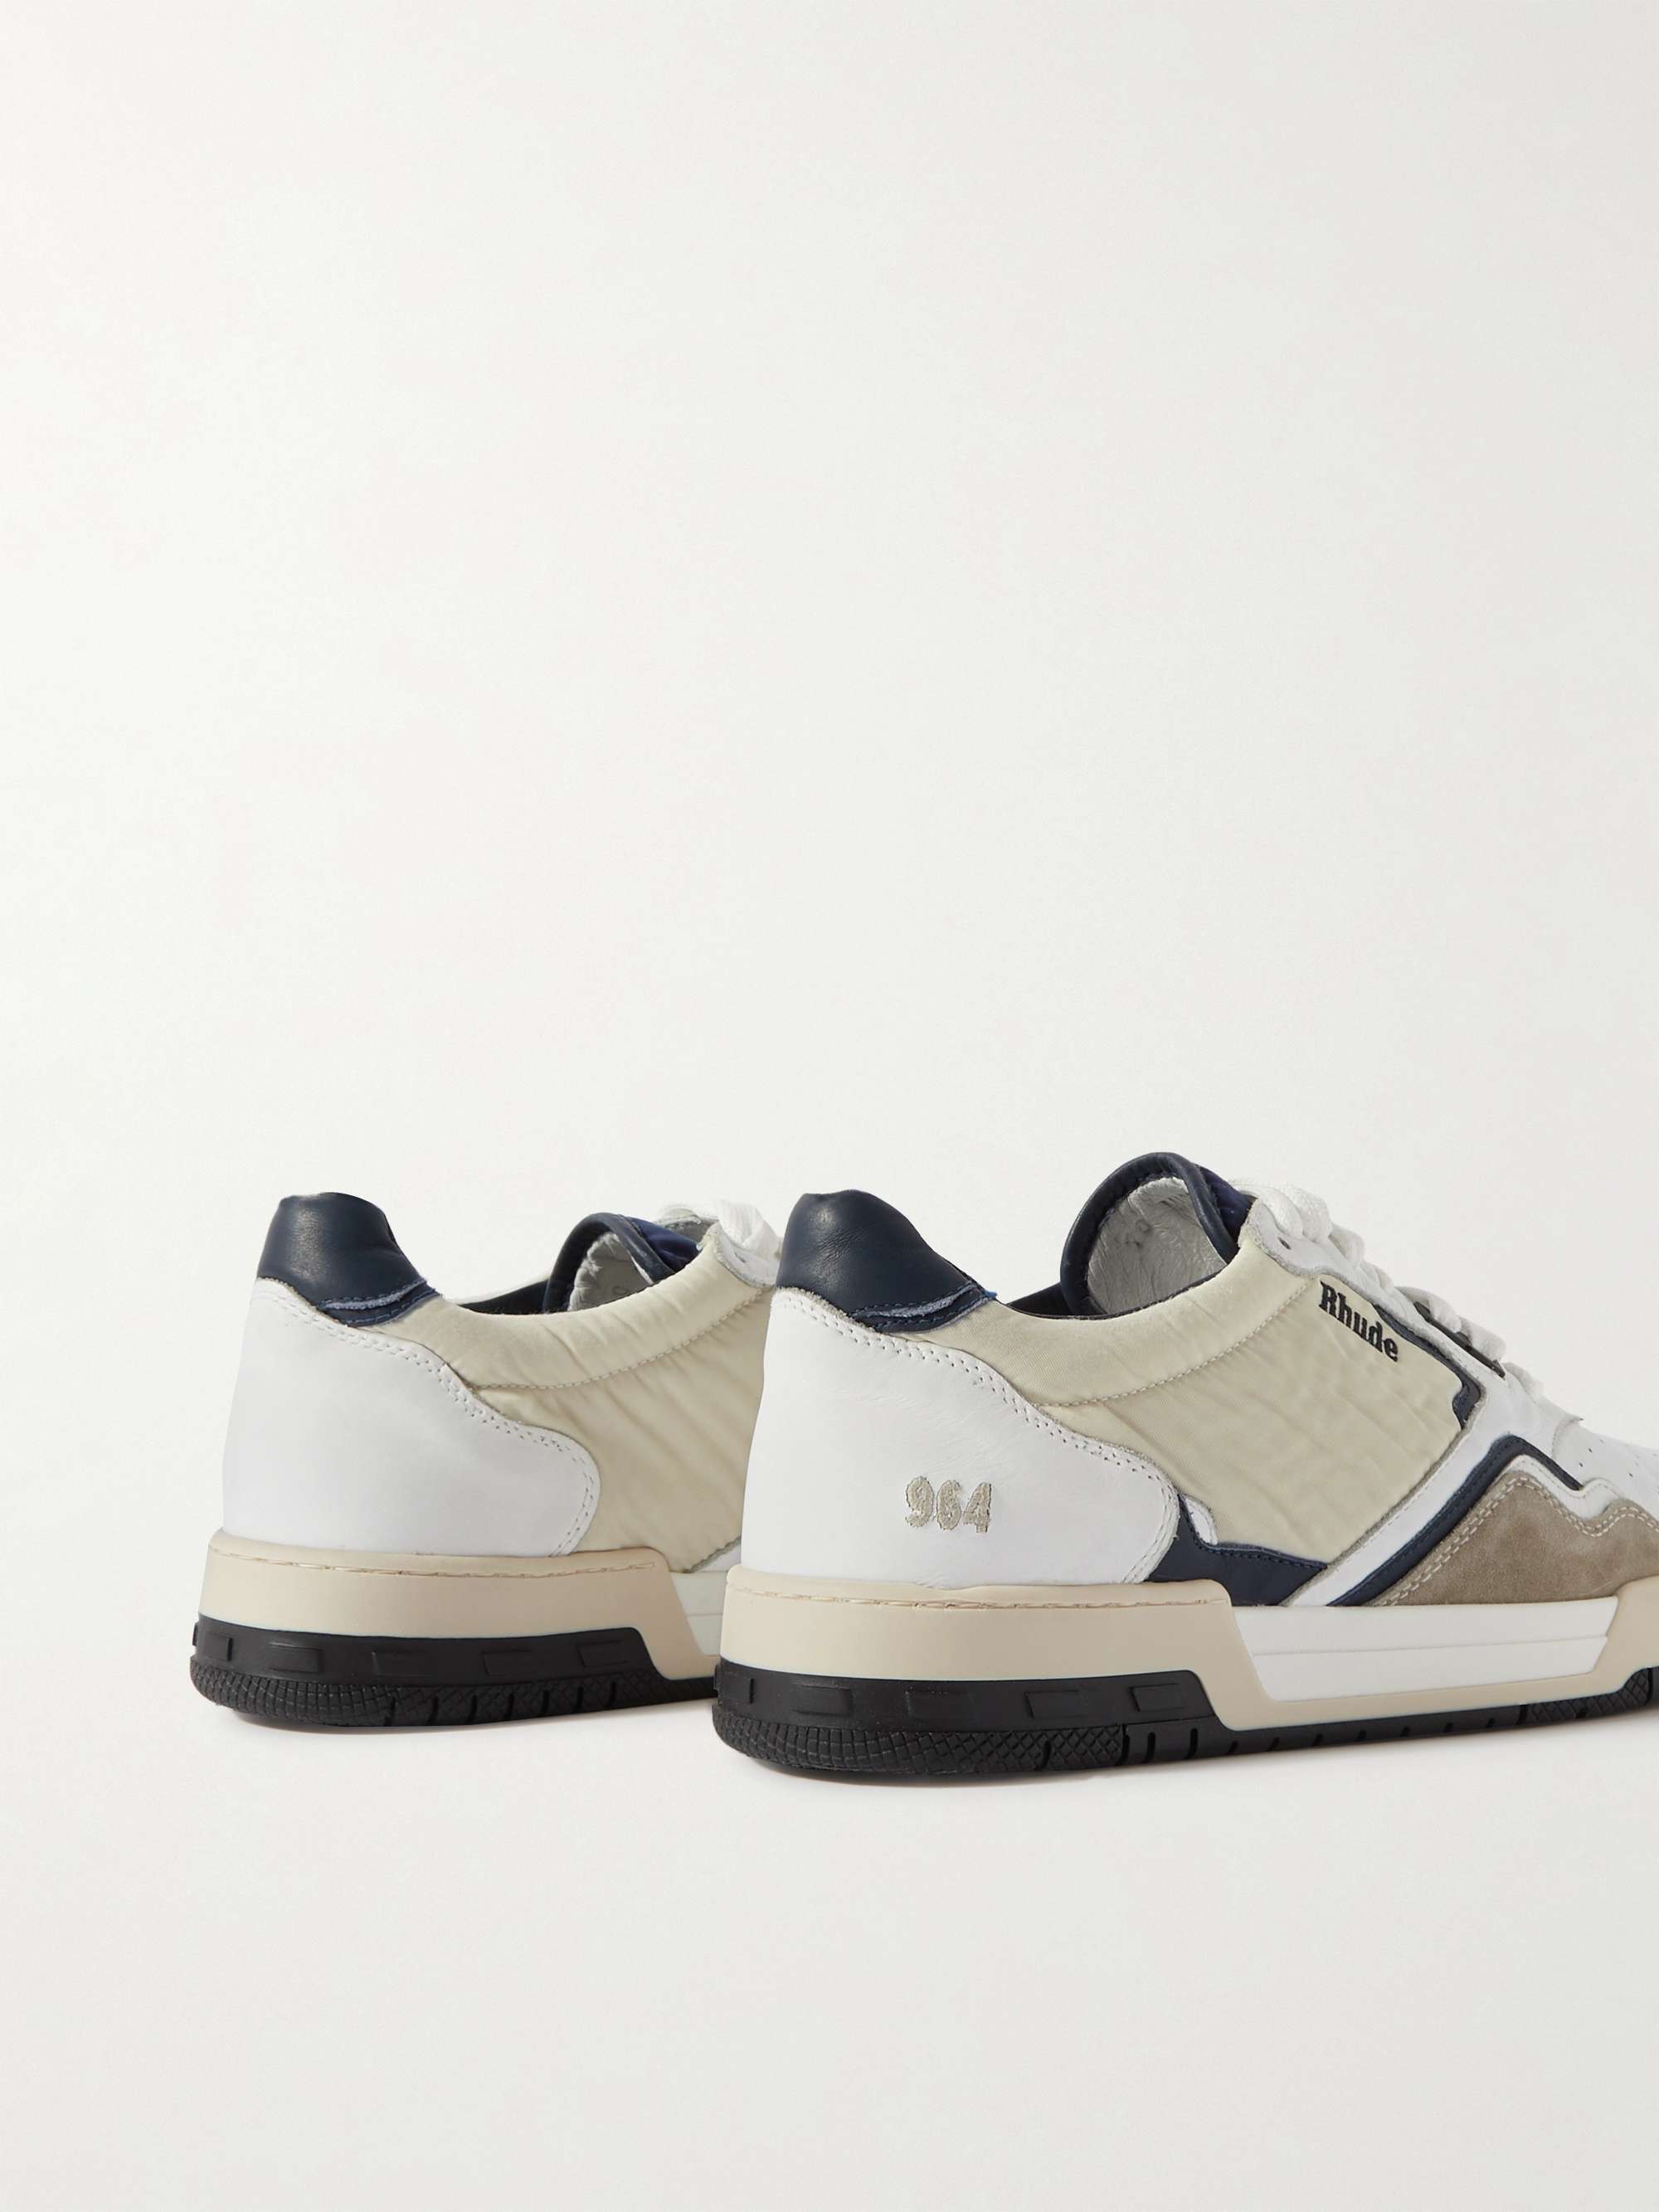 RHUDE Racing Suede-Trimmed Leather and Shell Sneakers